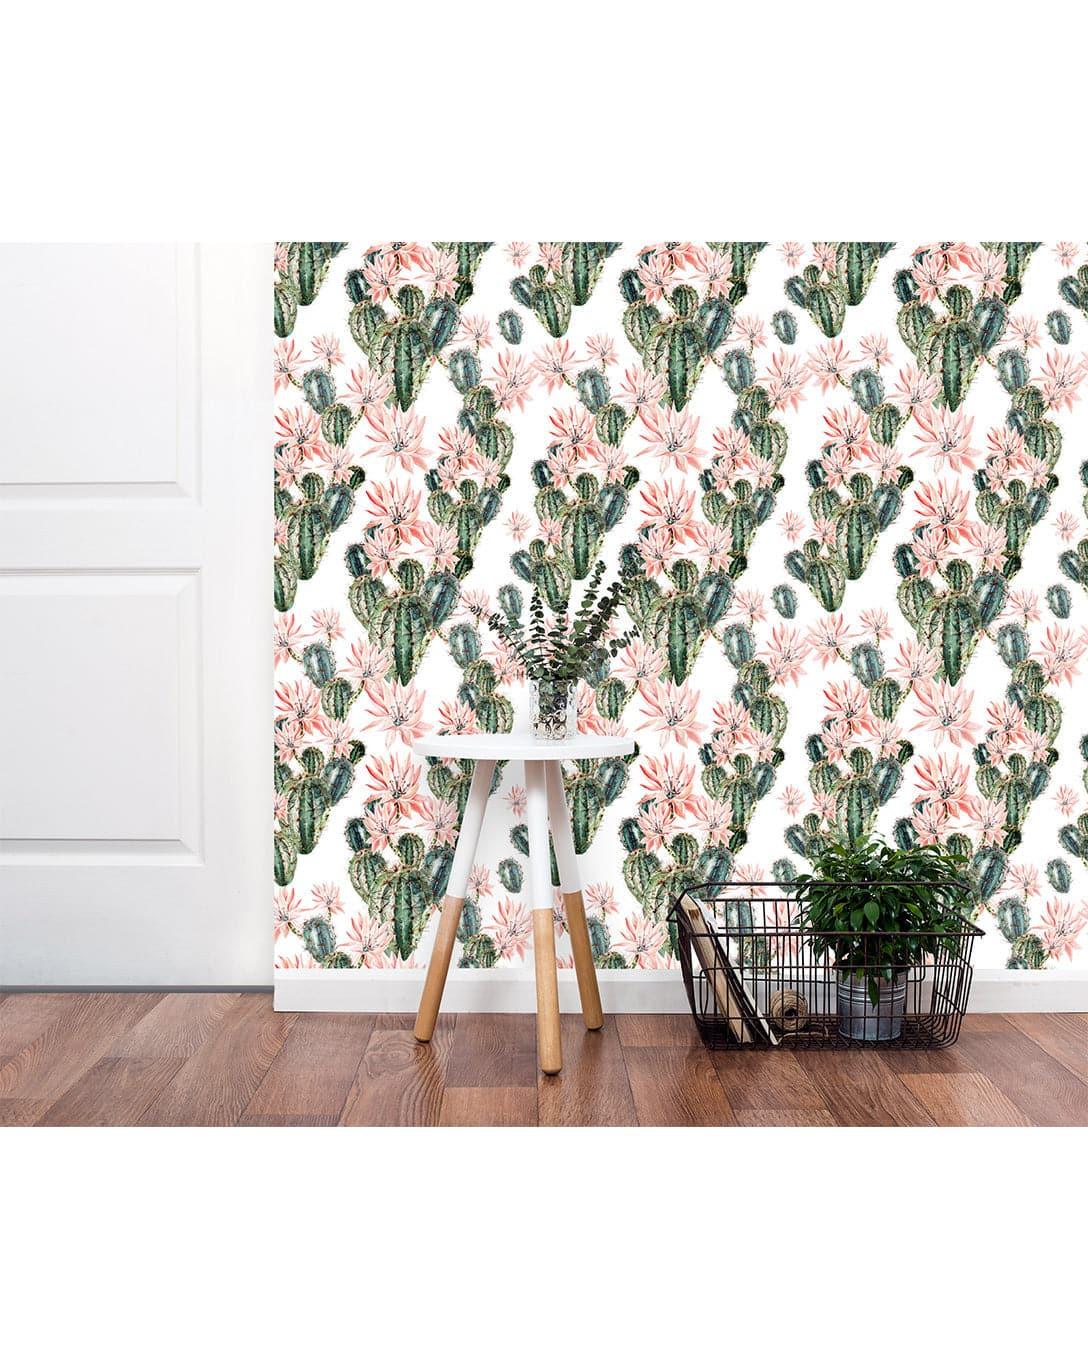 Watercolor Floral Blooming Cactus Removable Wallpaper Watercolor Floral Blooming Cactus Removable Wallpaper Watercolor Floral Blooming Cactus Removable Wallpaper 